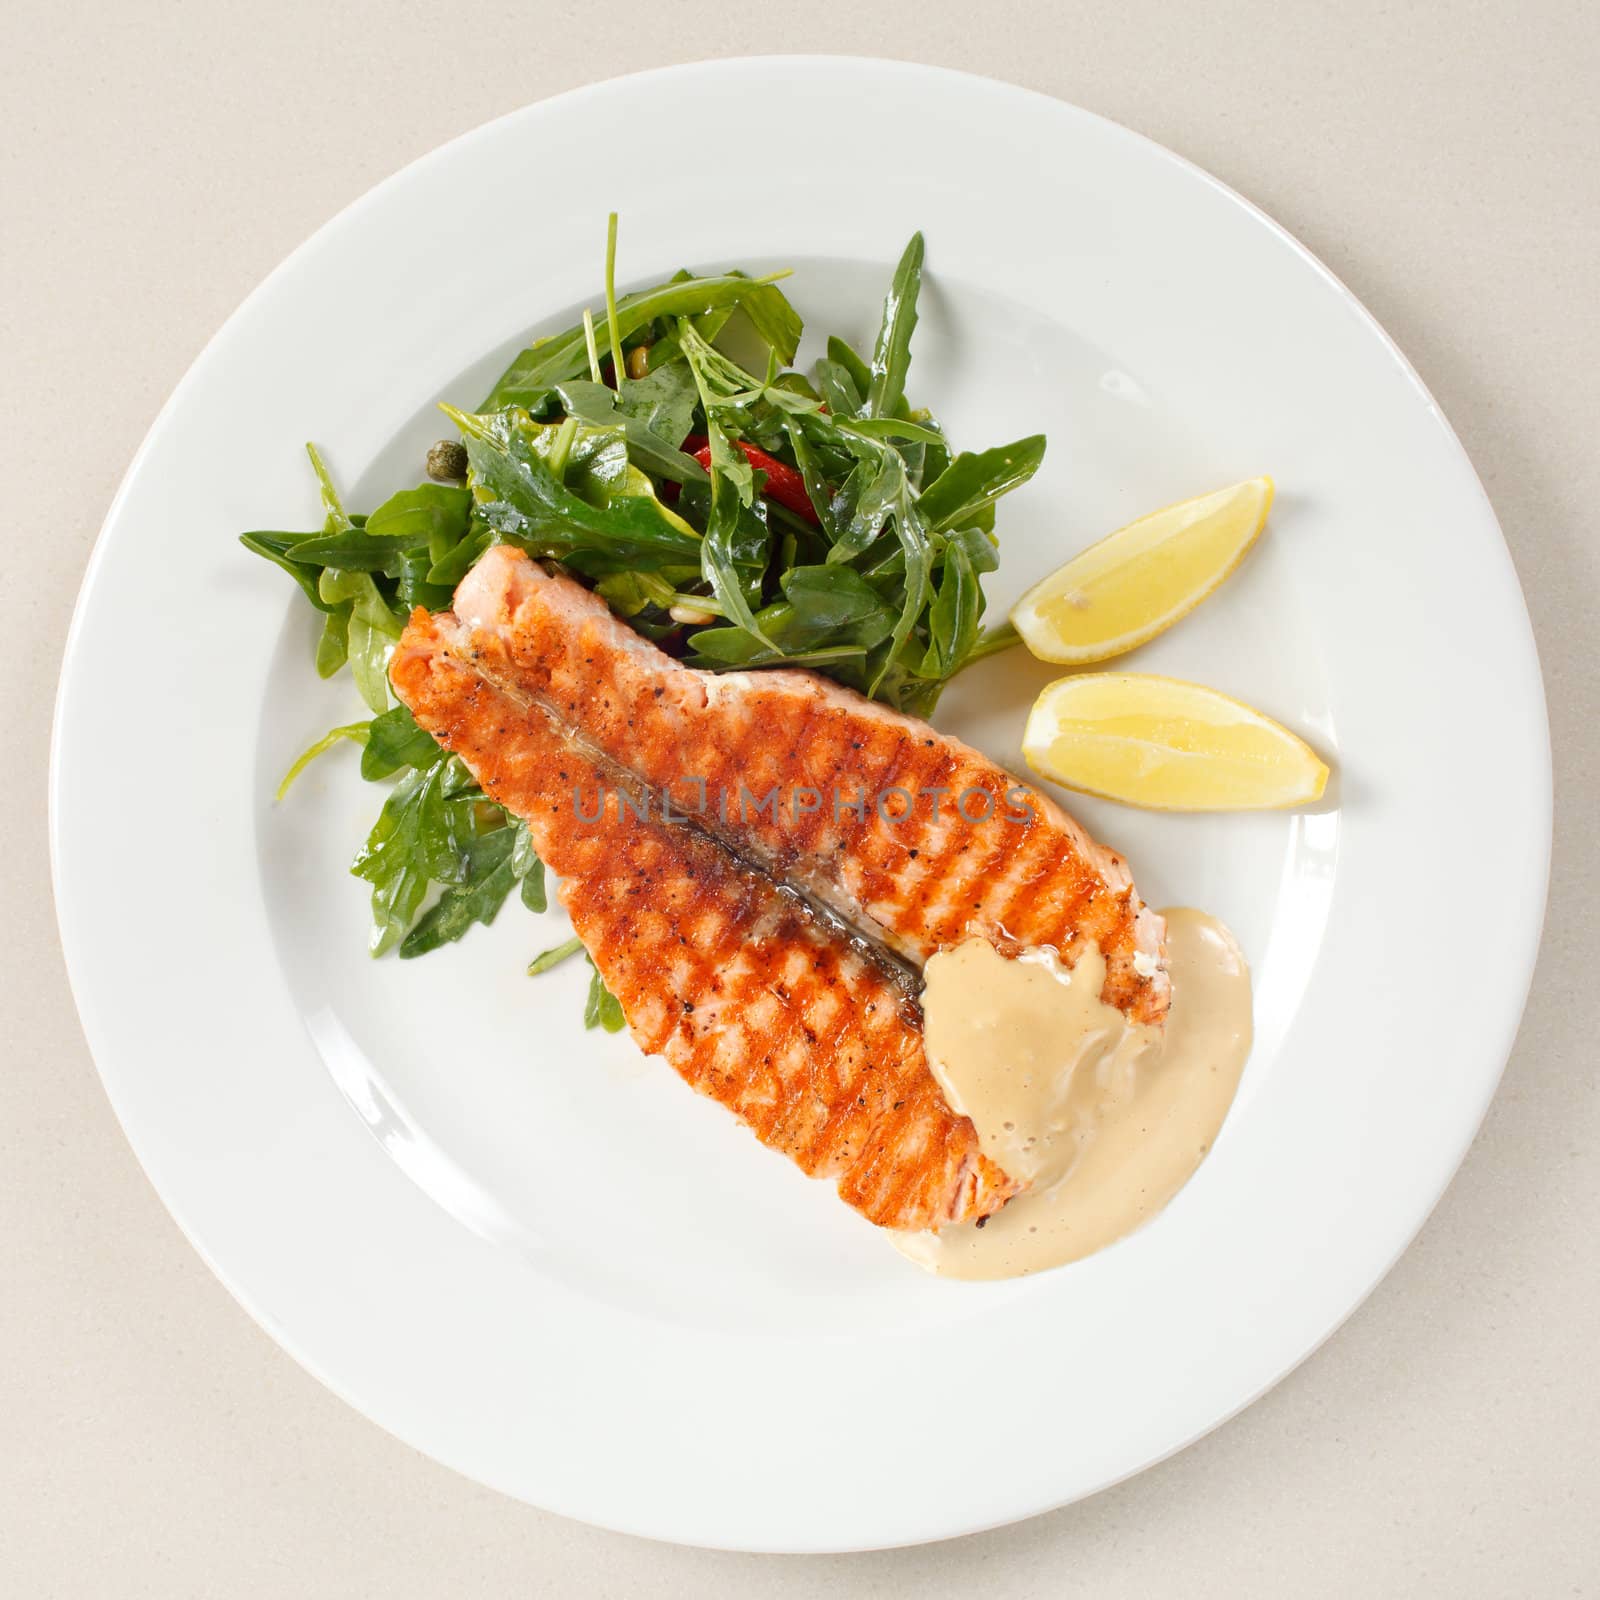 salmon steak with salad by shebeko